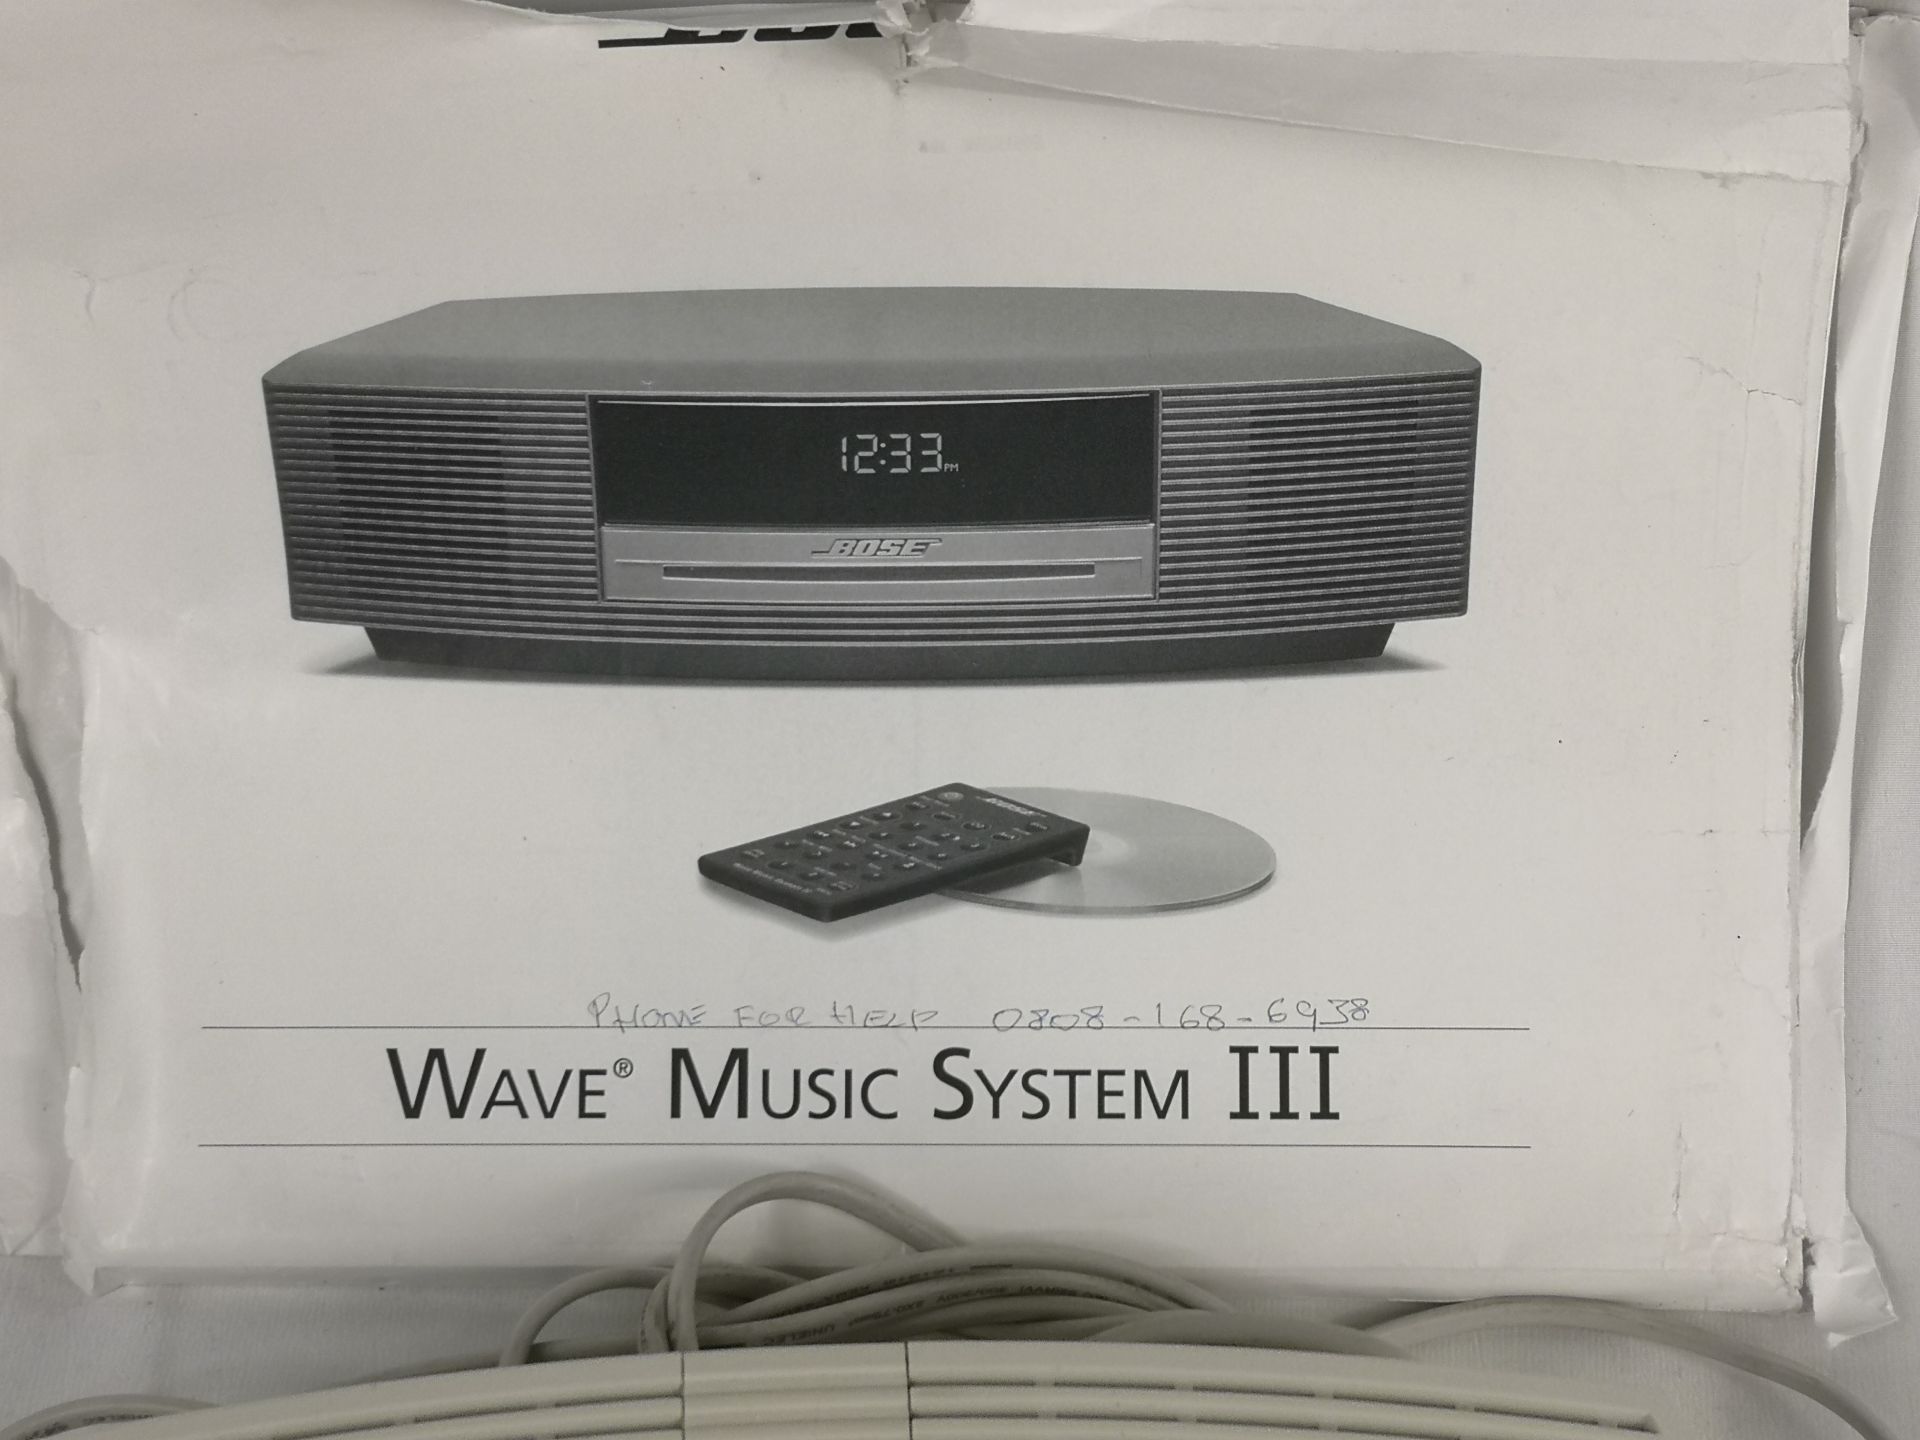 BOSE Wave music system III - Image 7 of 10